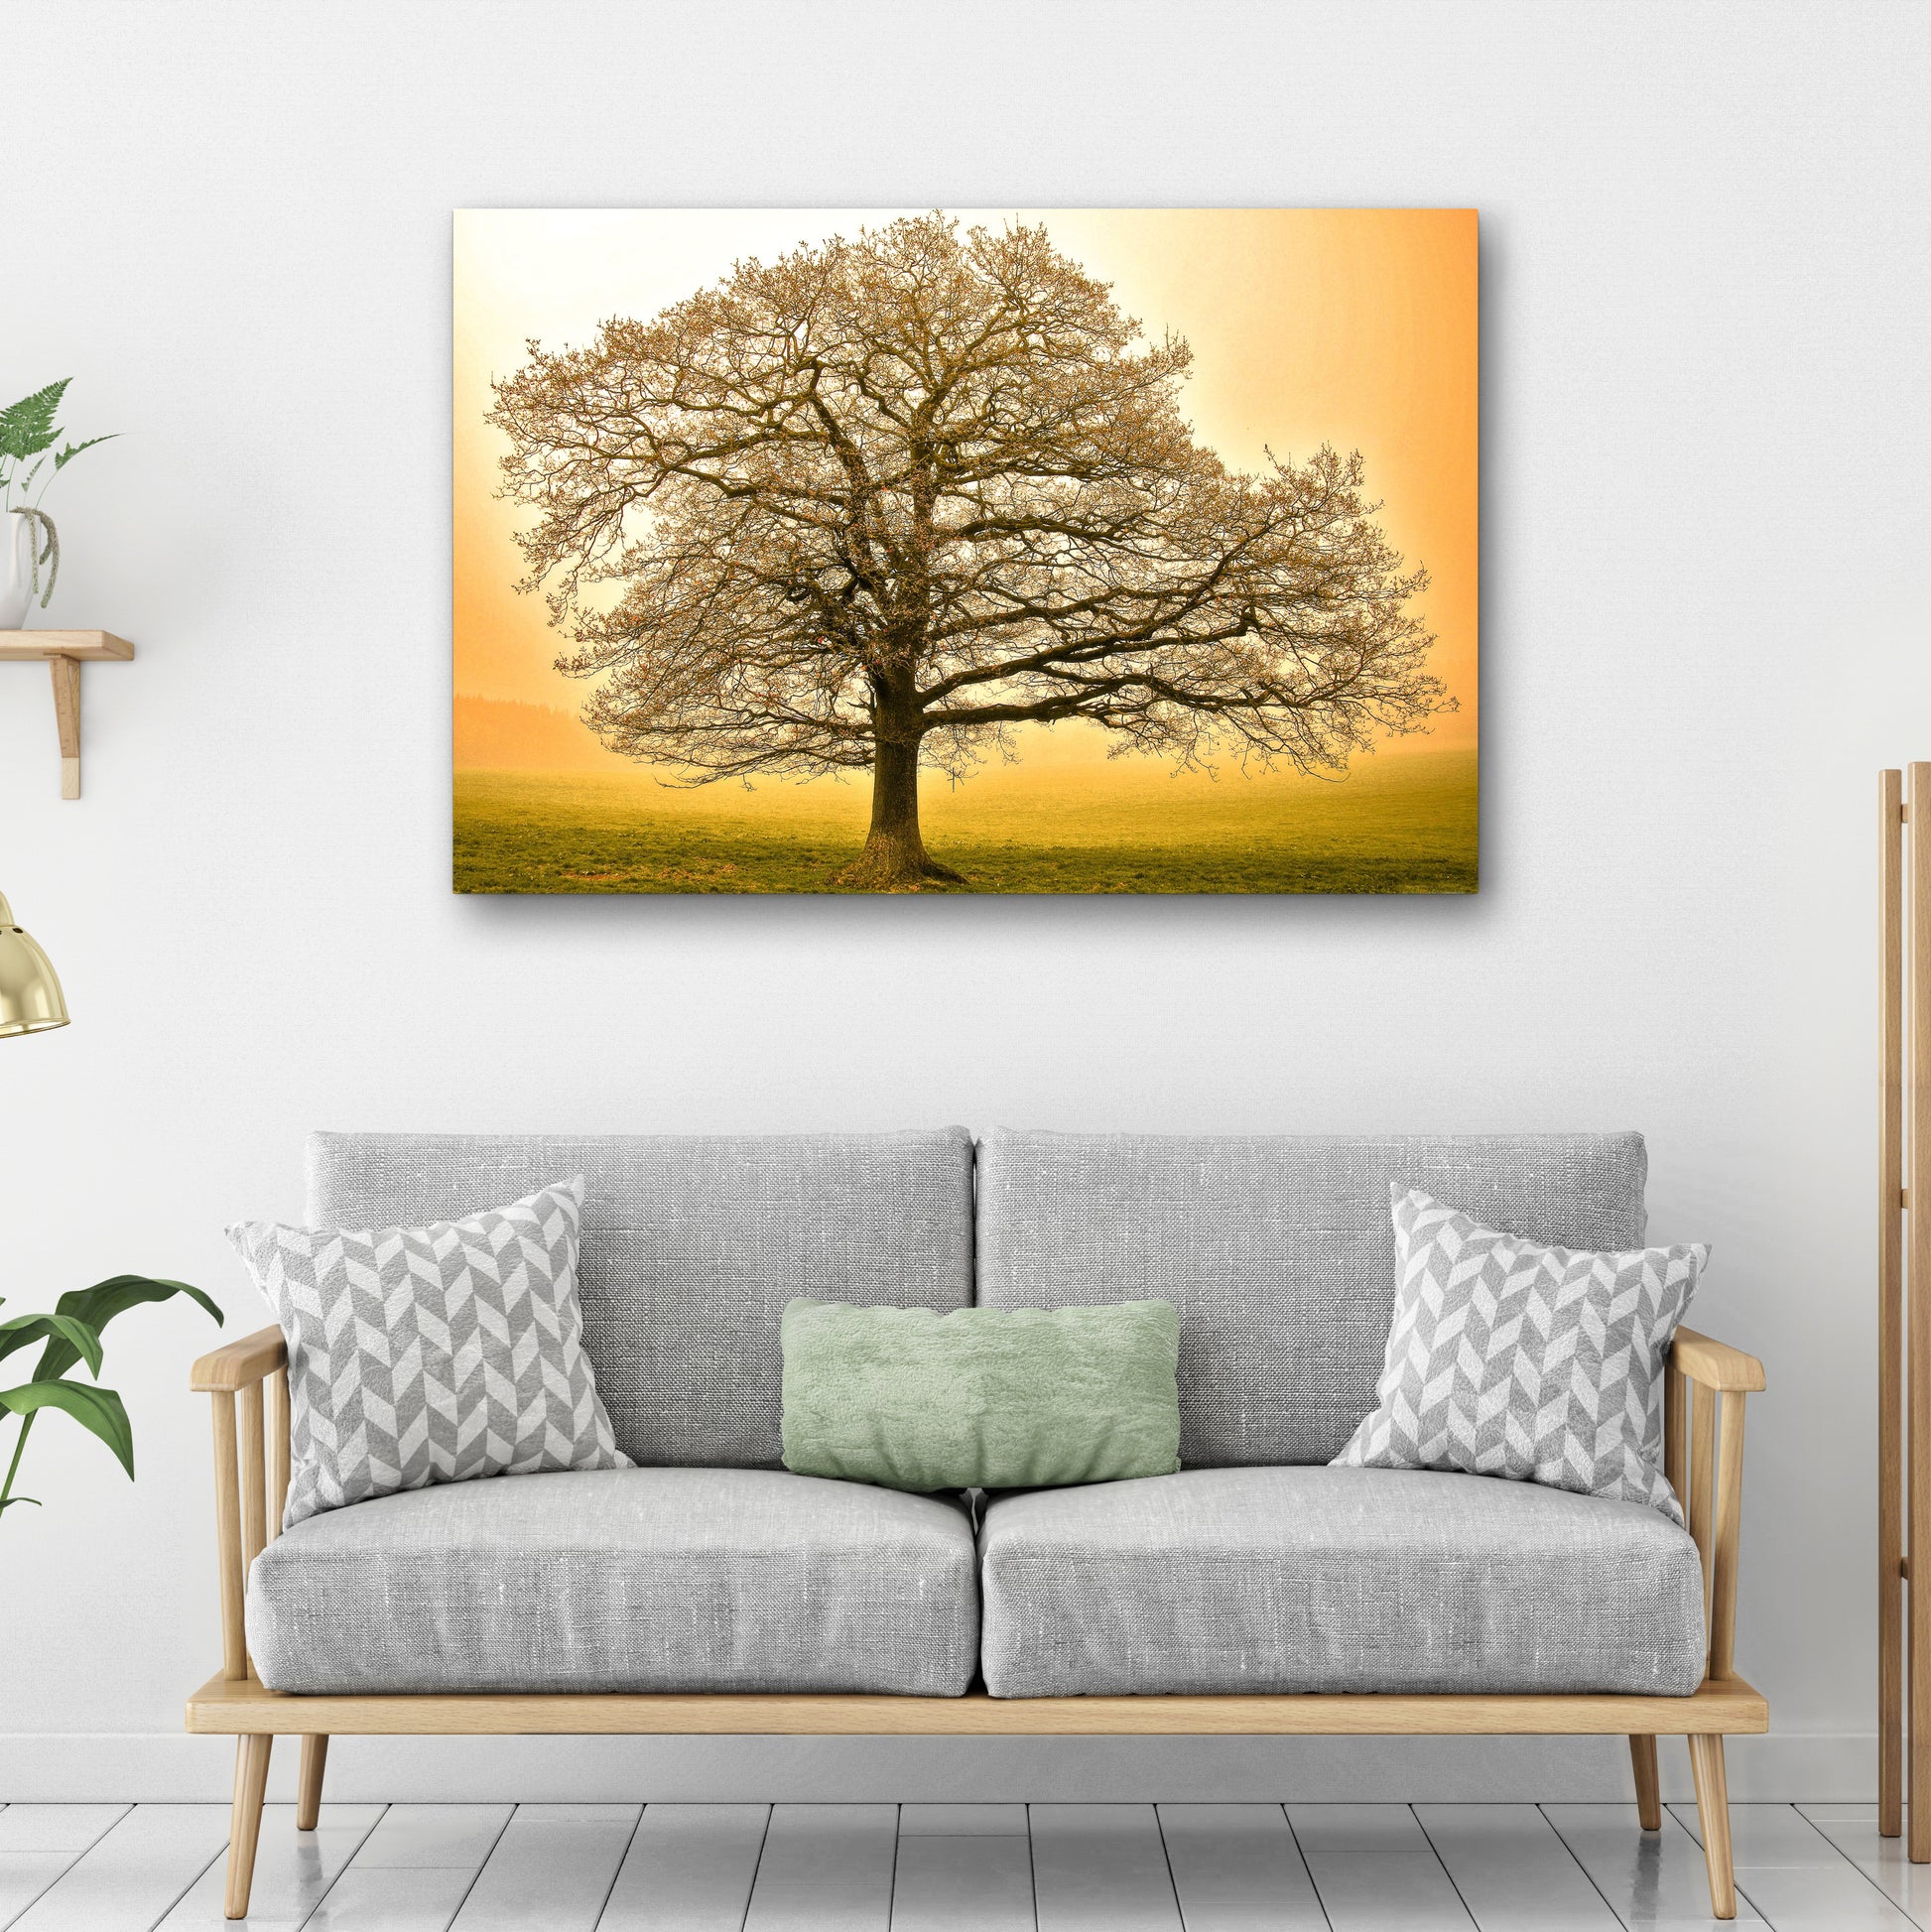 Golden Oak Tree Canvas Wall Art Style 2 - Image by Tailored Canvases